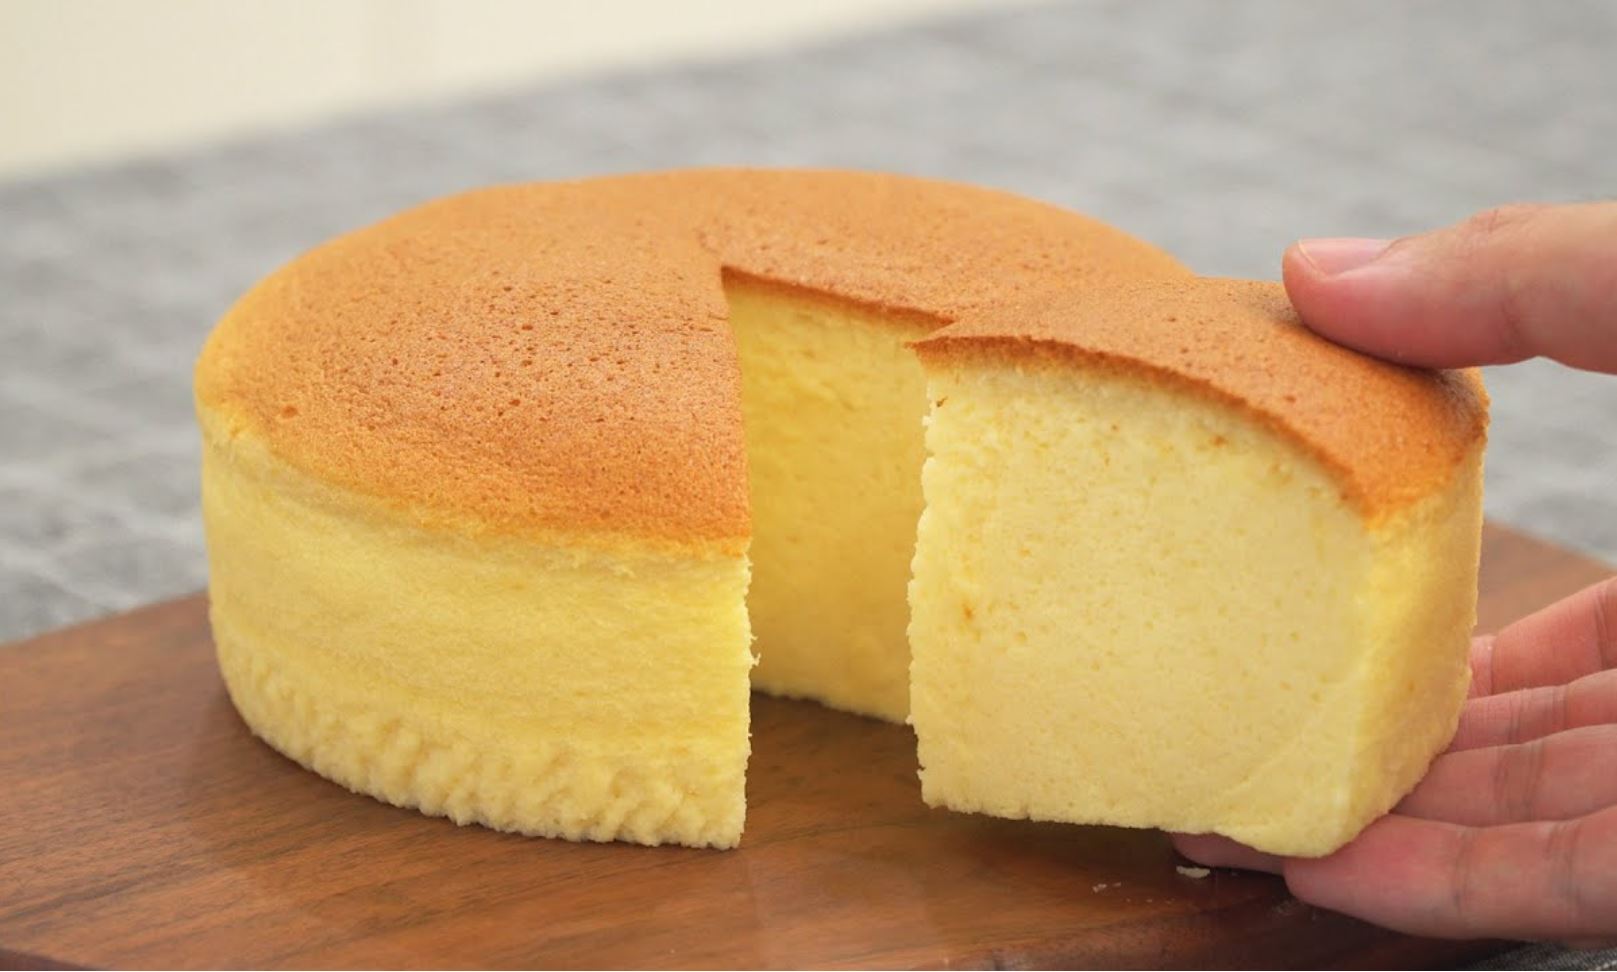 The World’s Softest Cheese Cake